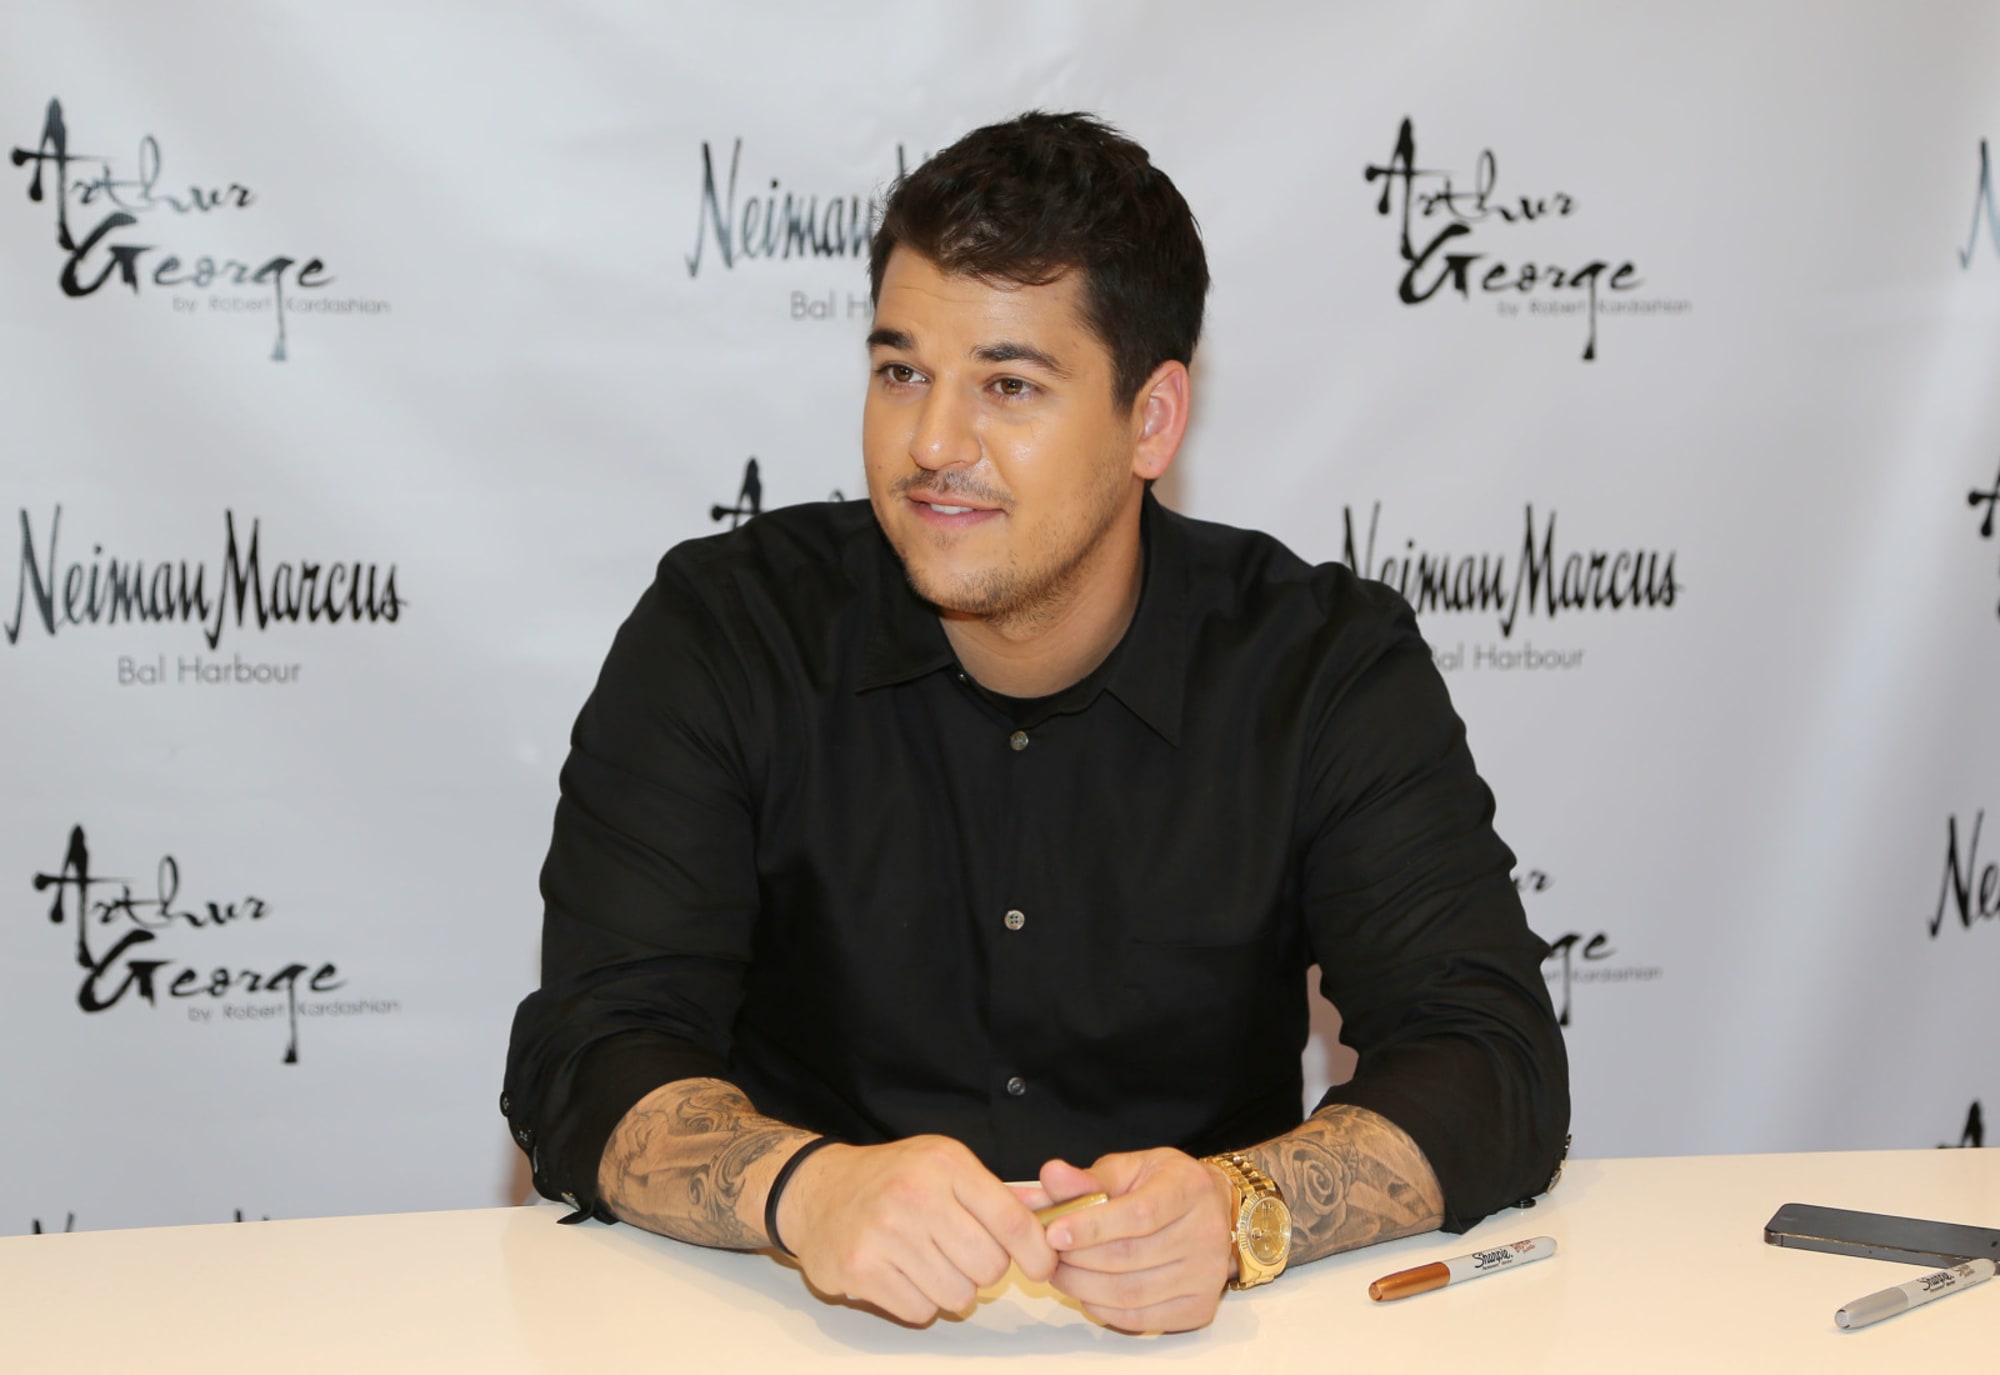 Rob Kardashian's Net Worth, Career, And Personal Life Details